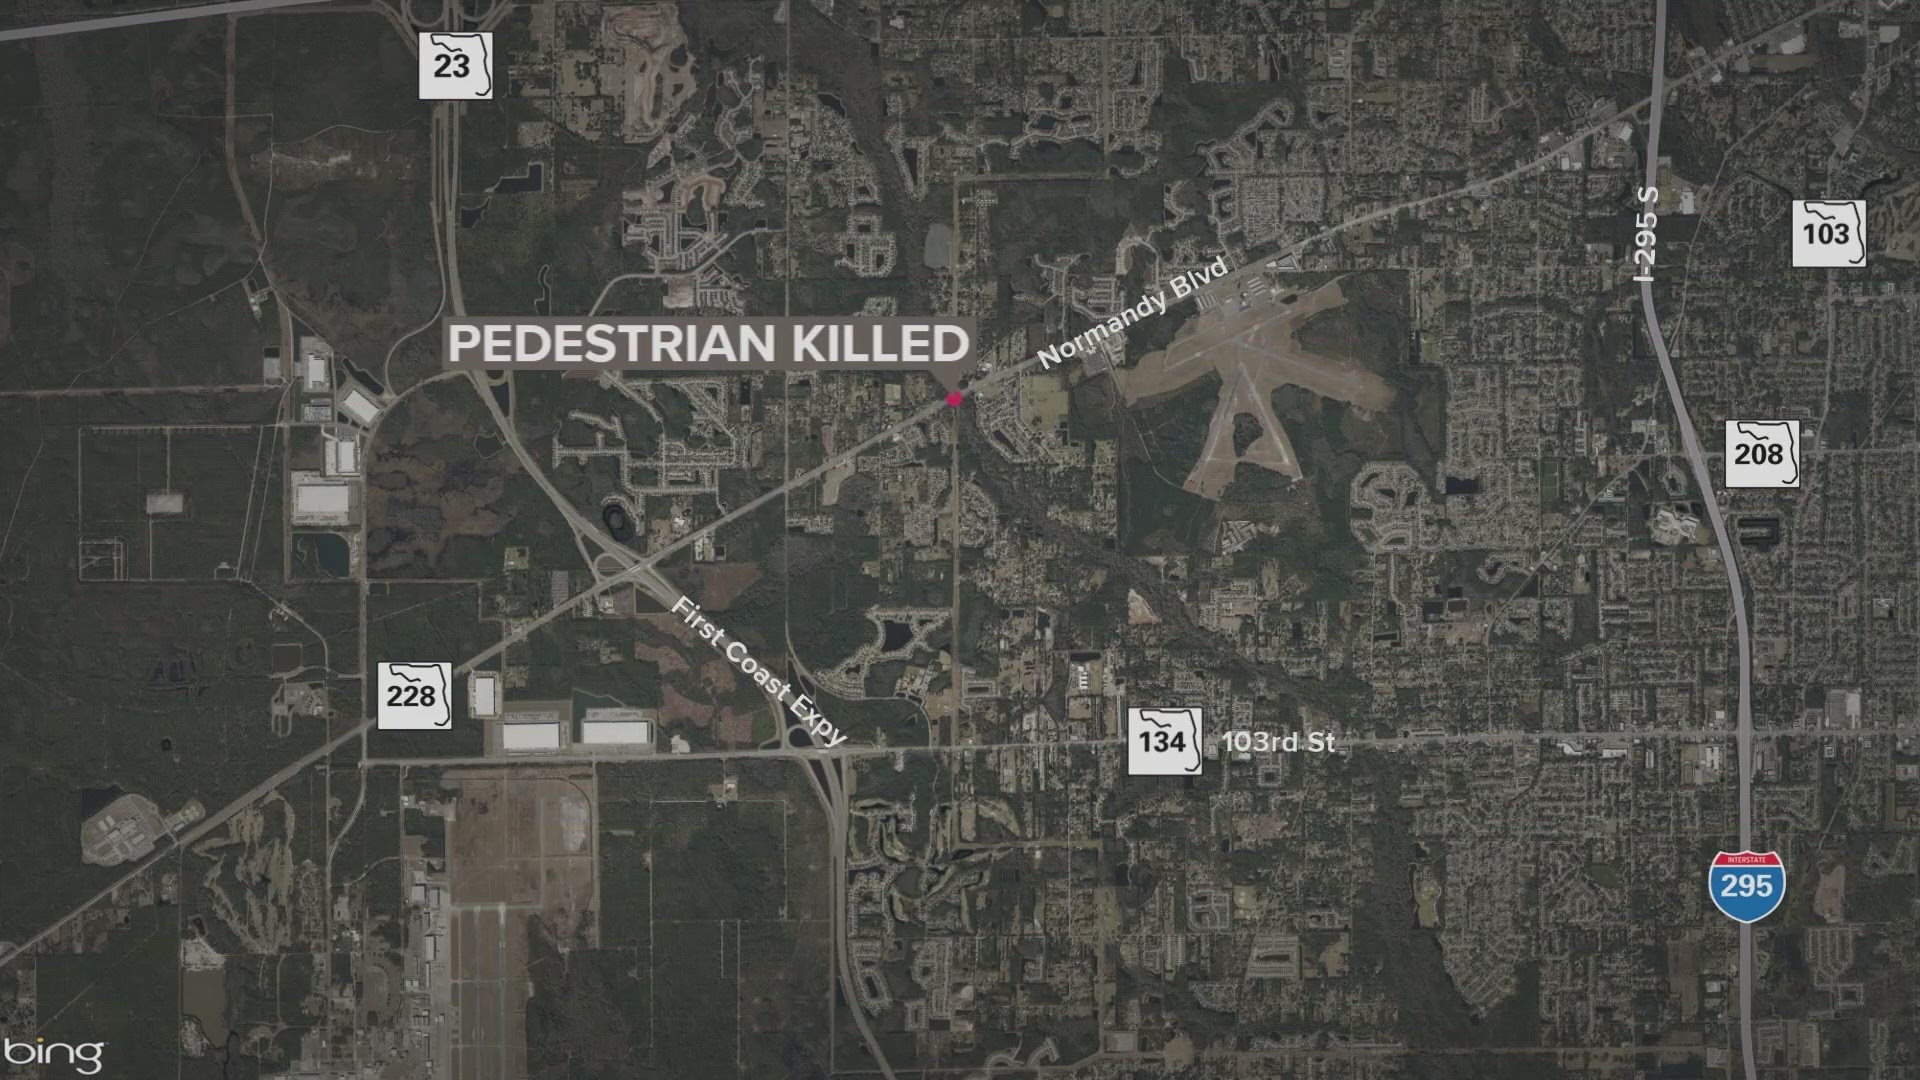 This marks the 10th pedestrian killed in Duval County this year.